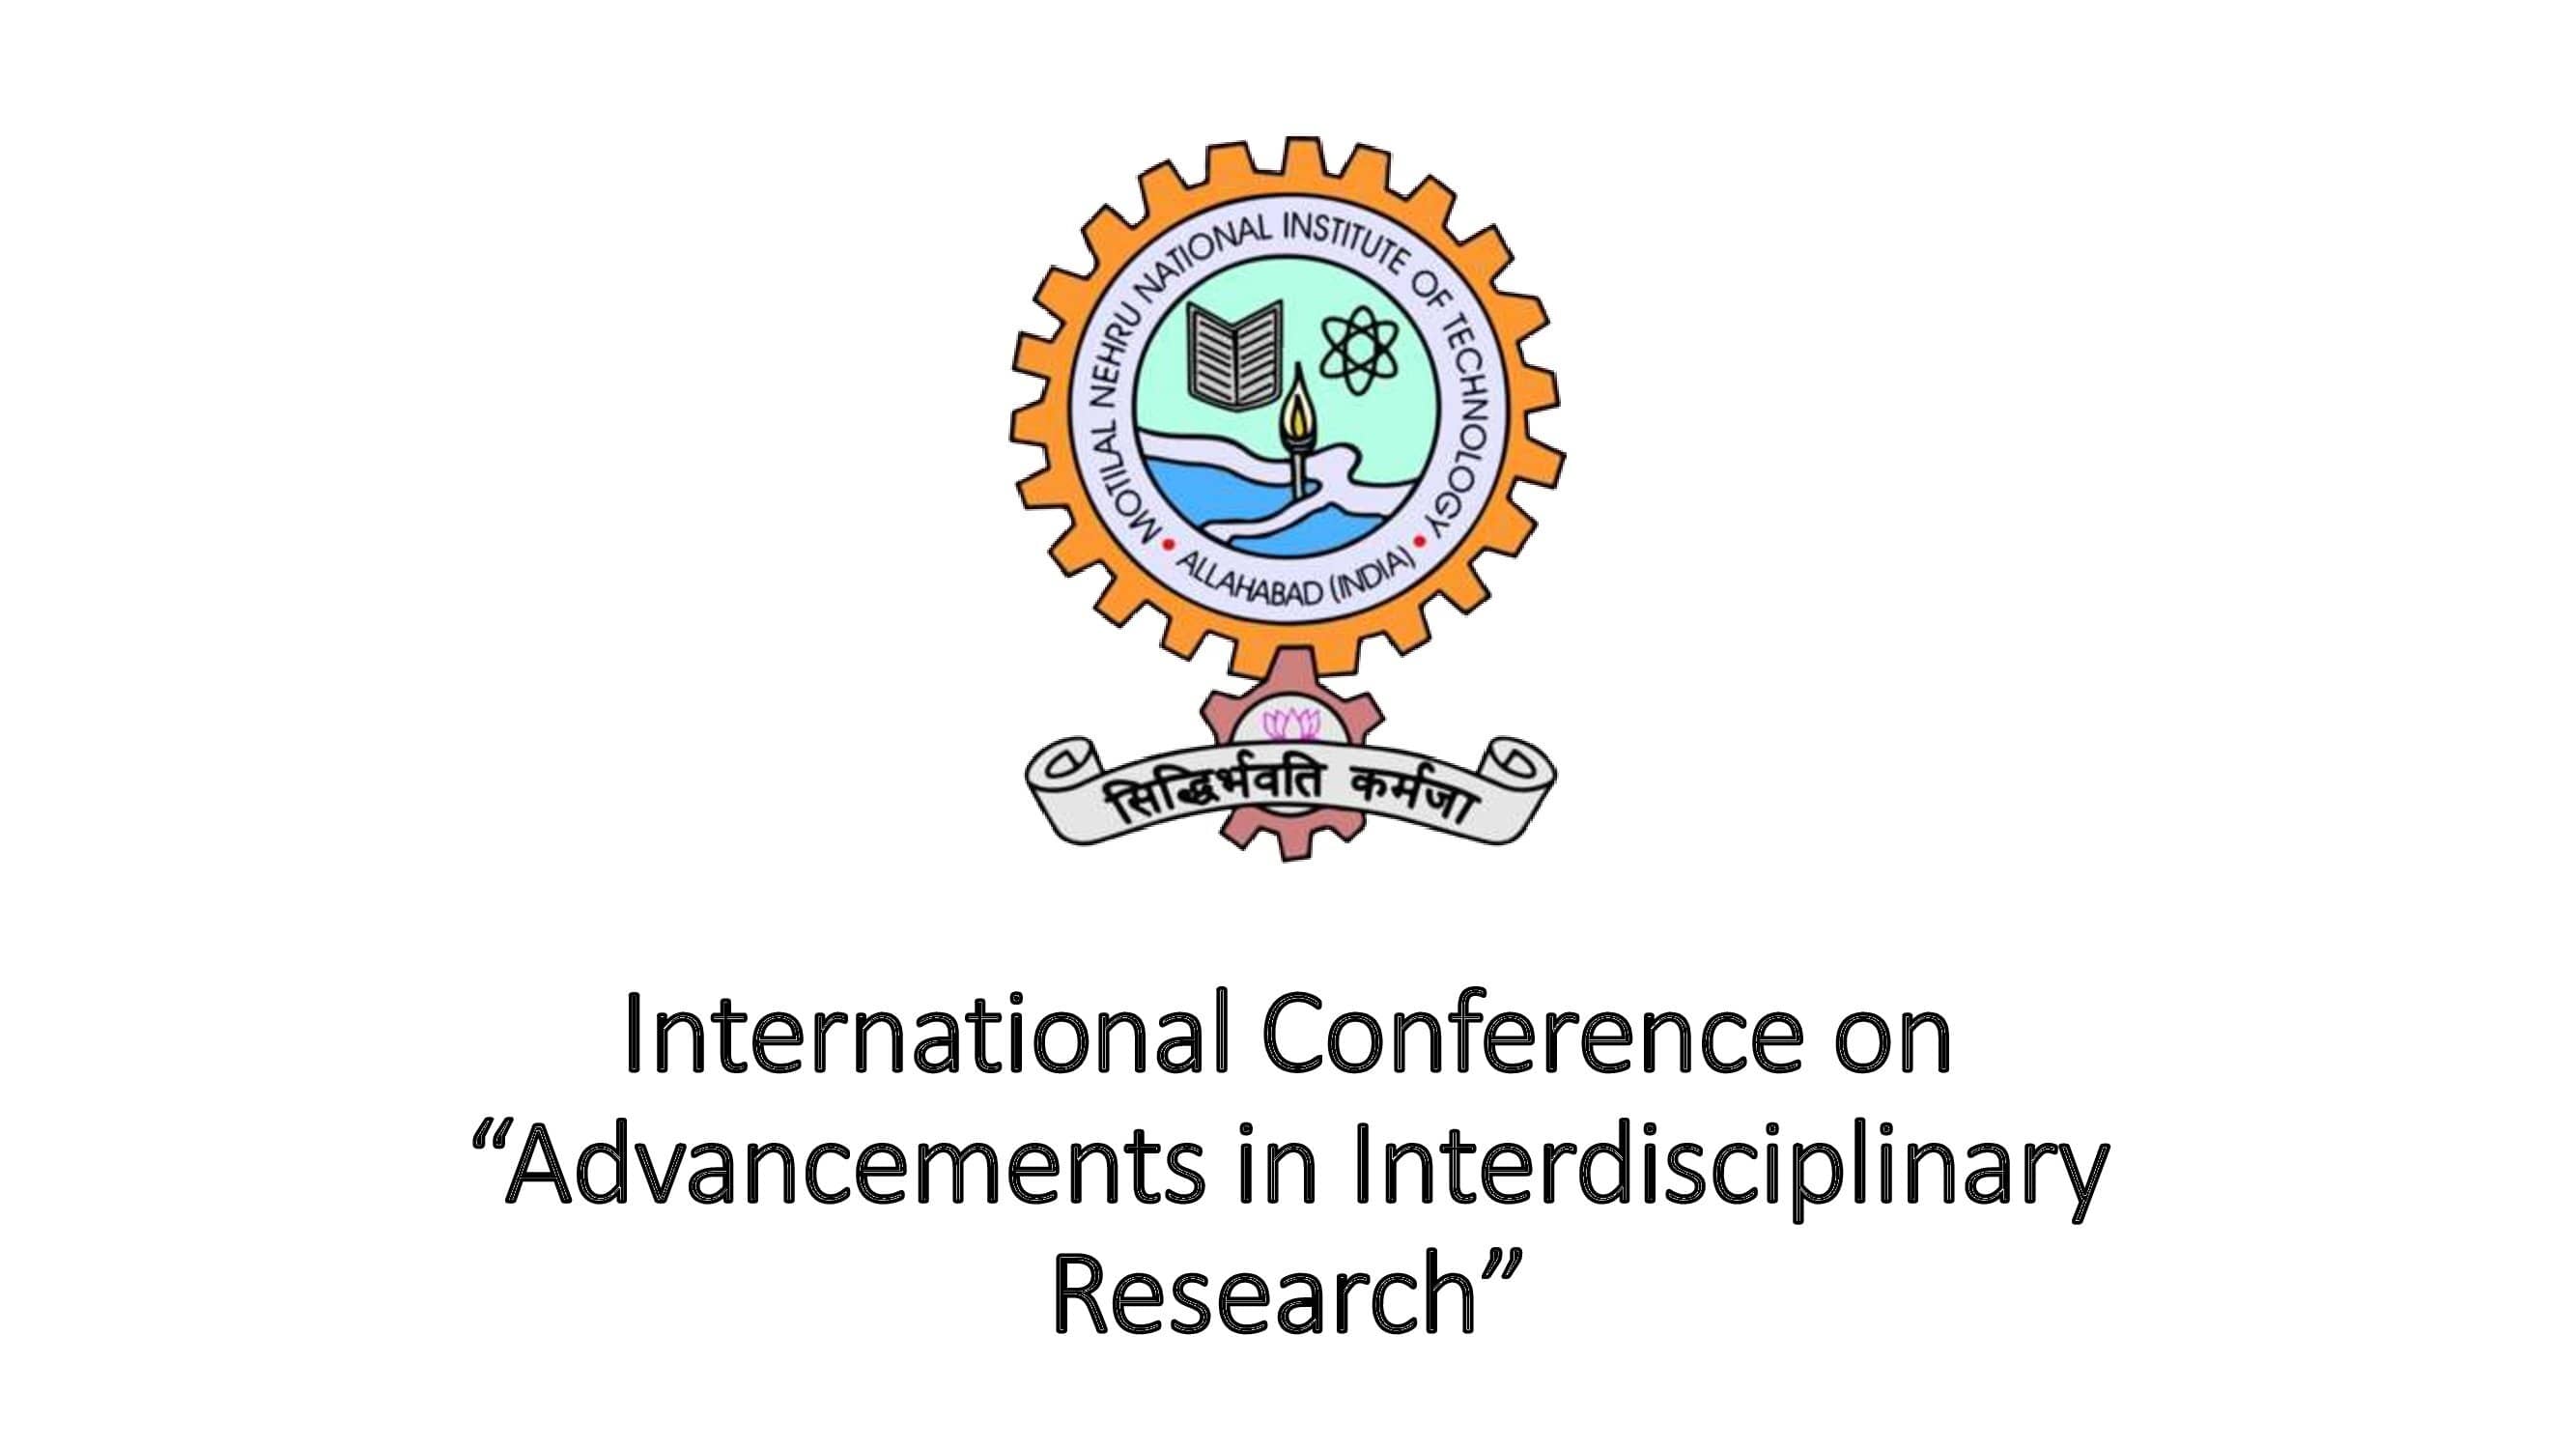 International Conference on “Advancements in Interdisciplinary Research”